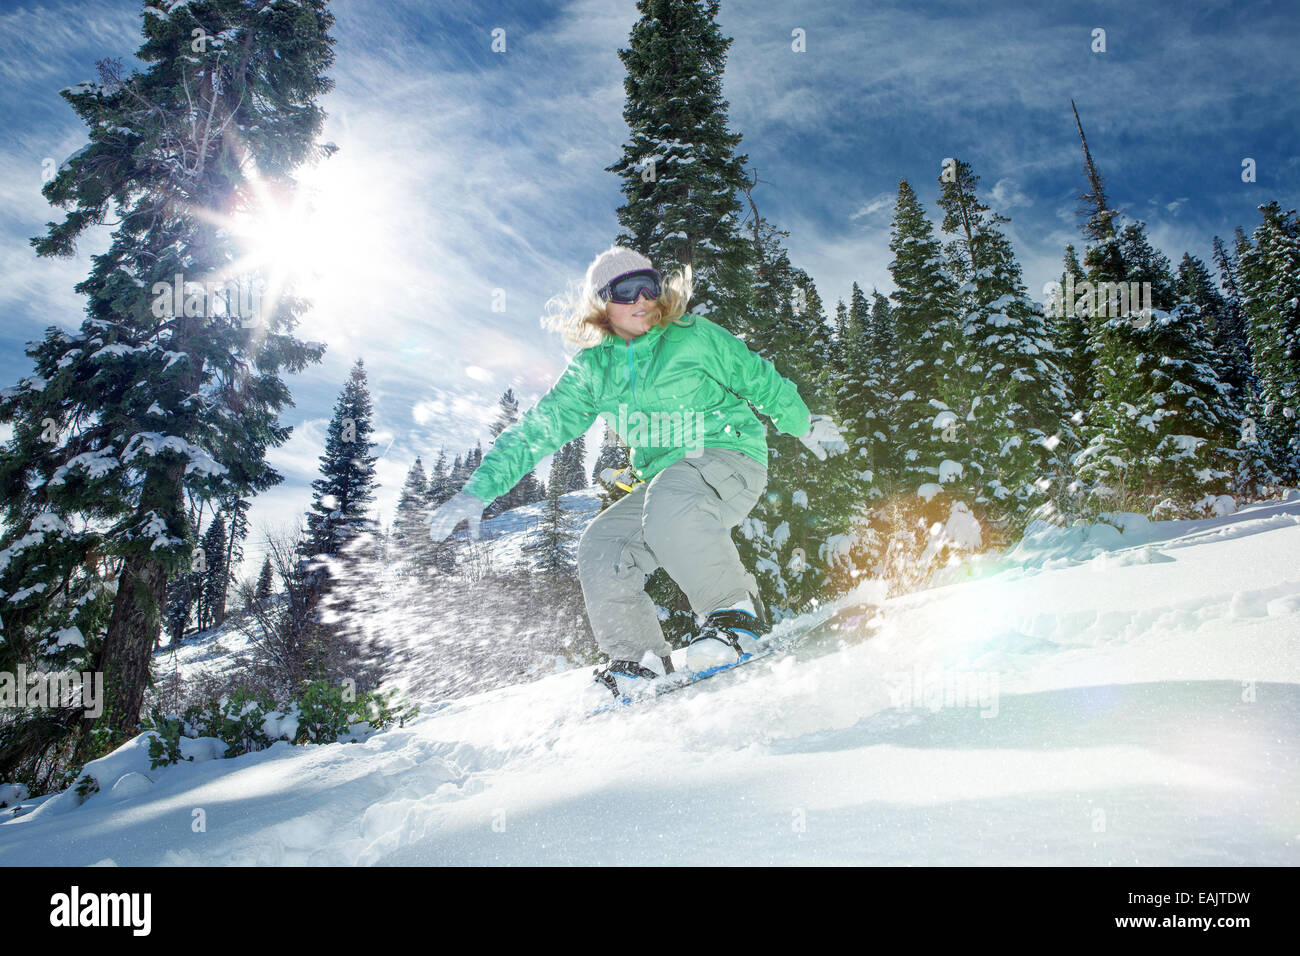 view of a young girl snowboarding in winter environment Stock Photo